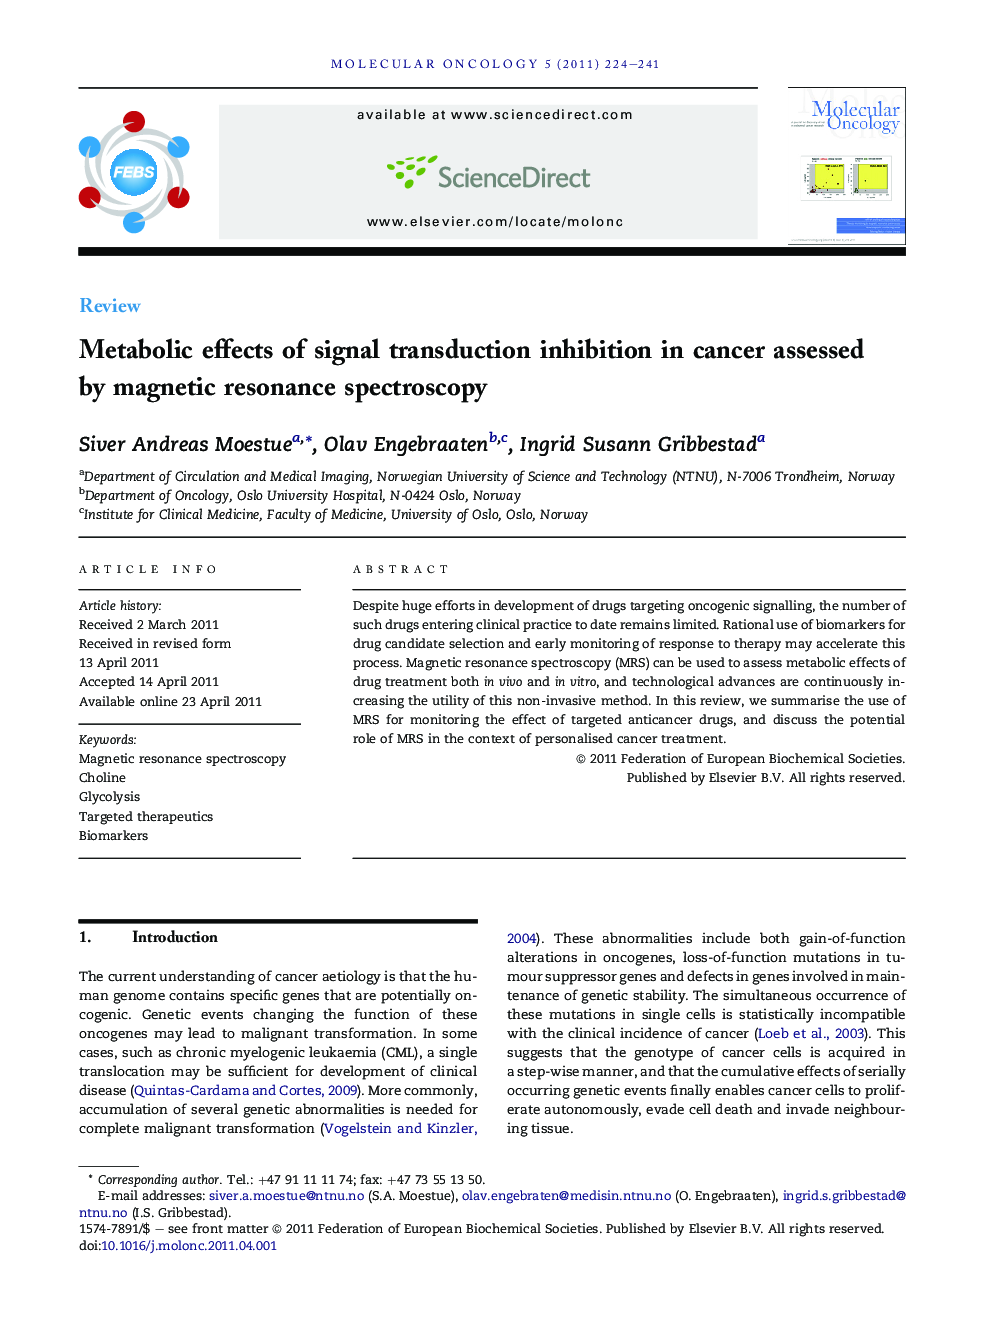 Metabolic effects of signal transduction inhibition in cancer assessed by magnetic resonance spectroscopy